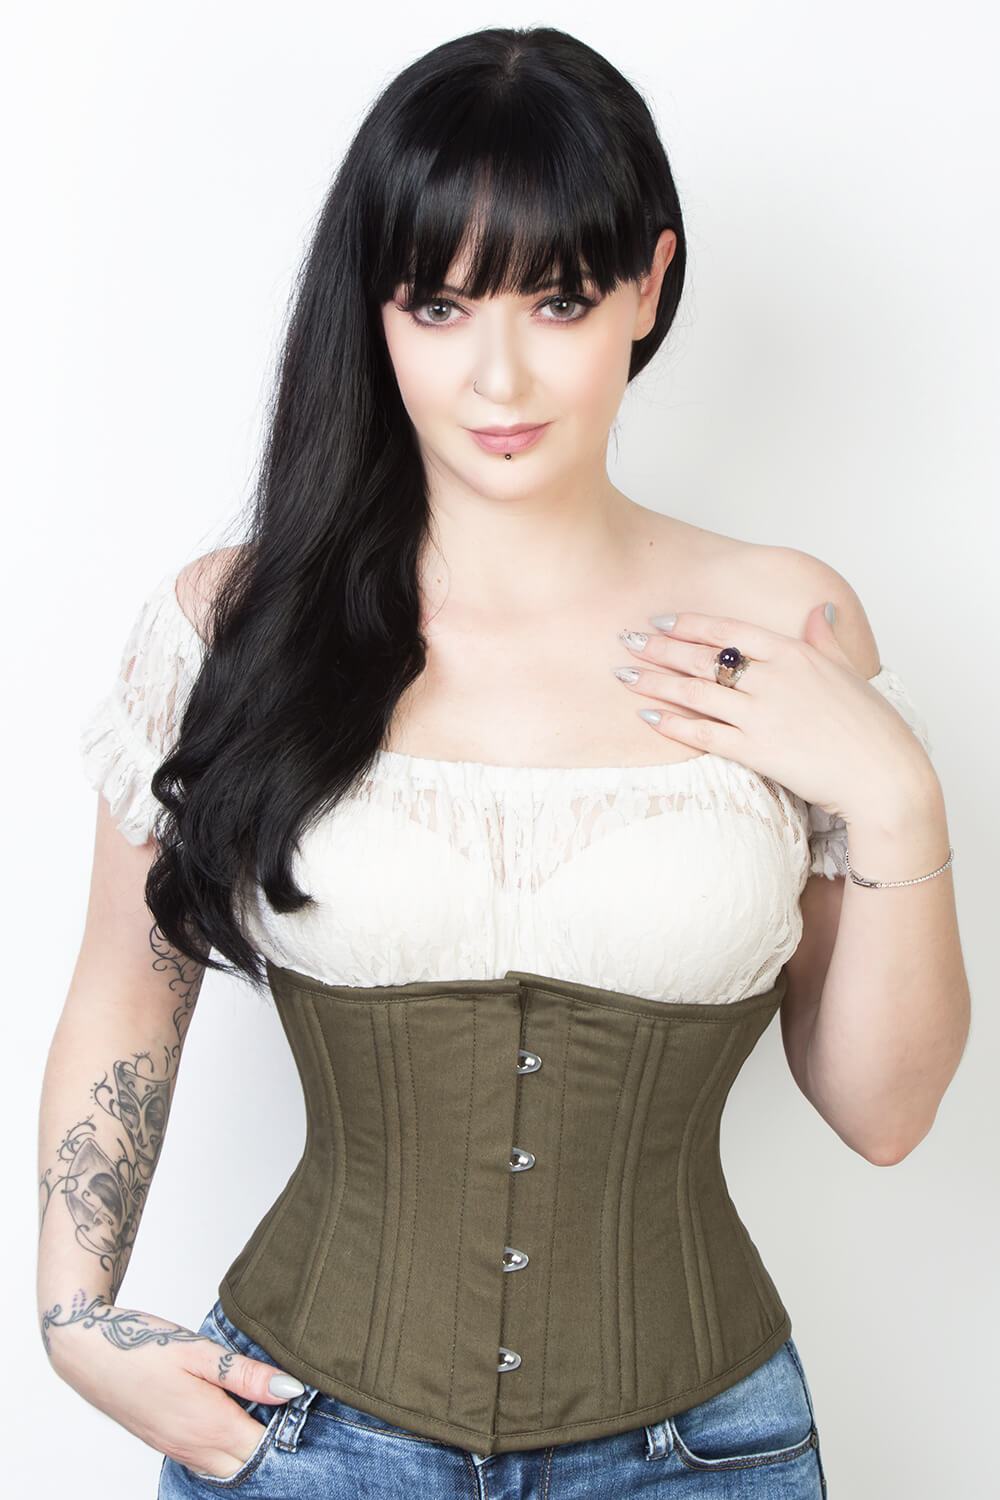 View the Custom Made Corset & Waist Training Corset we have with us